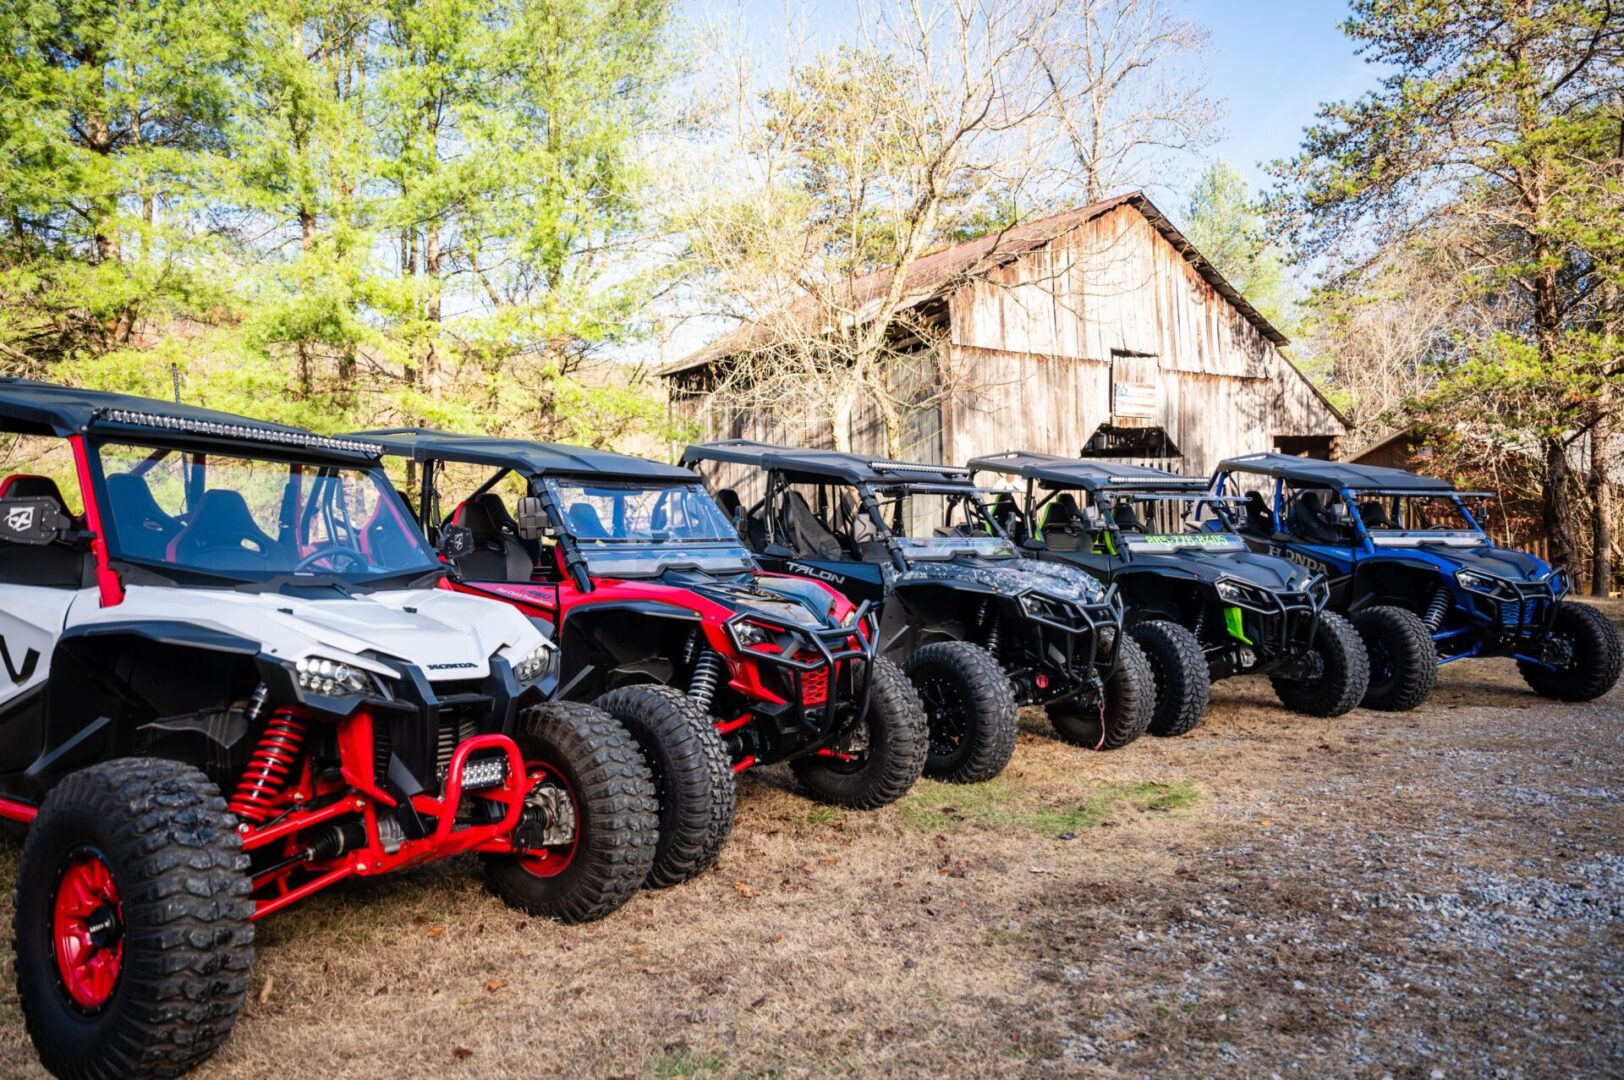 A row of all terrain vehicles parked in the dirt.